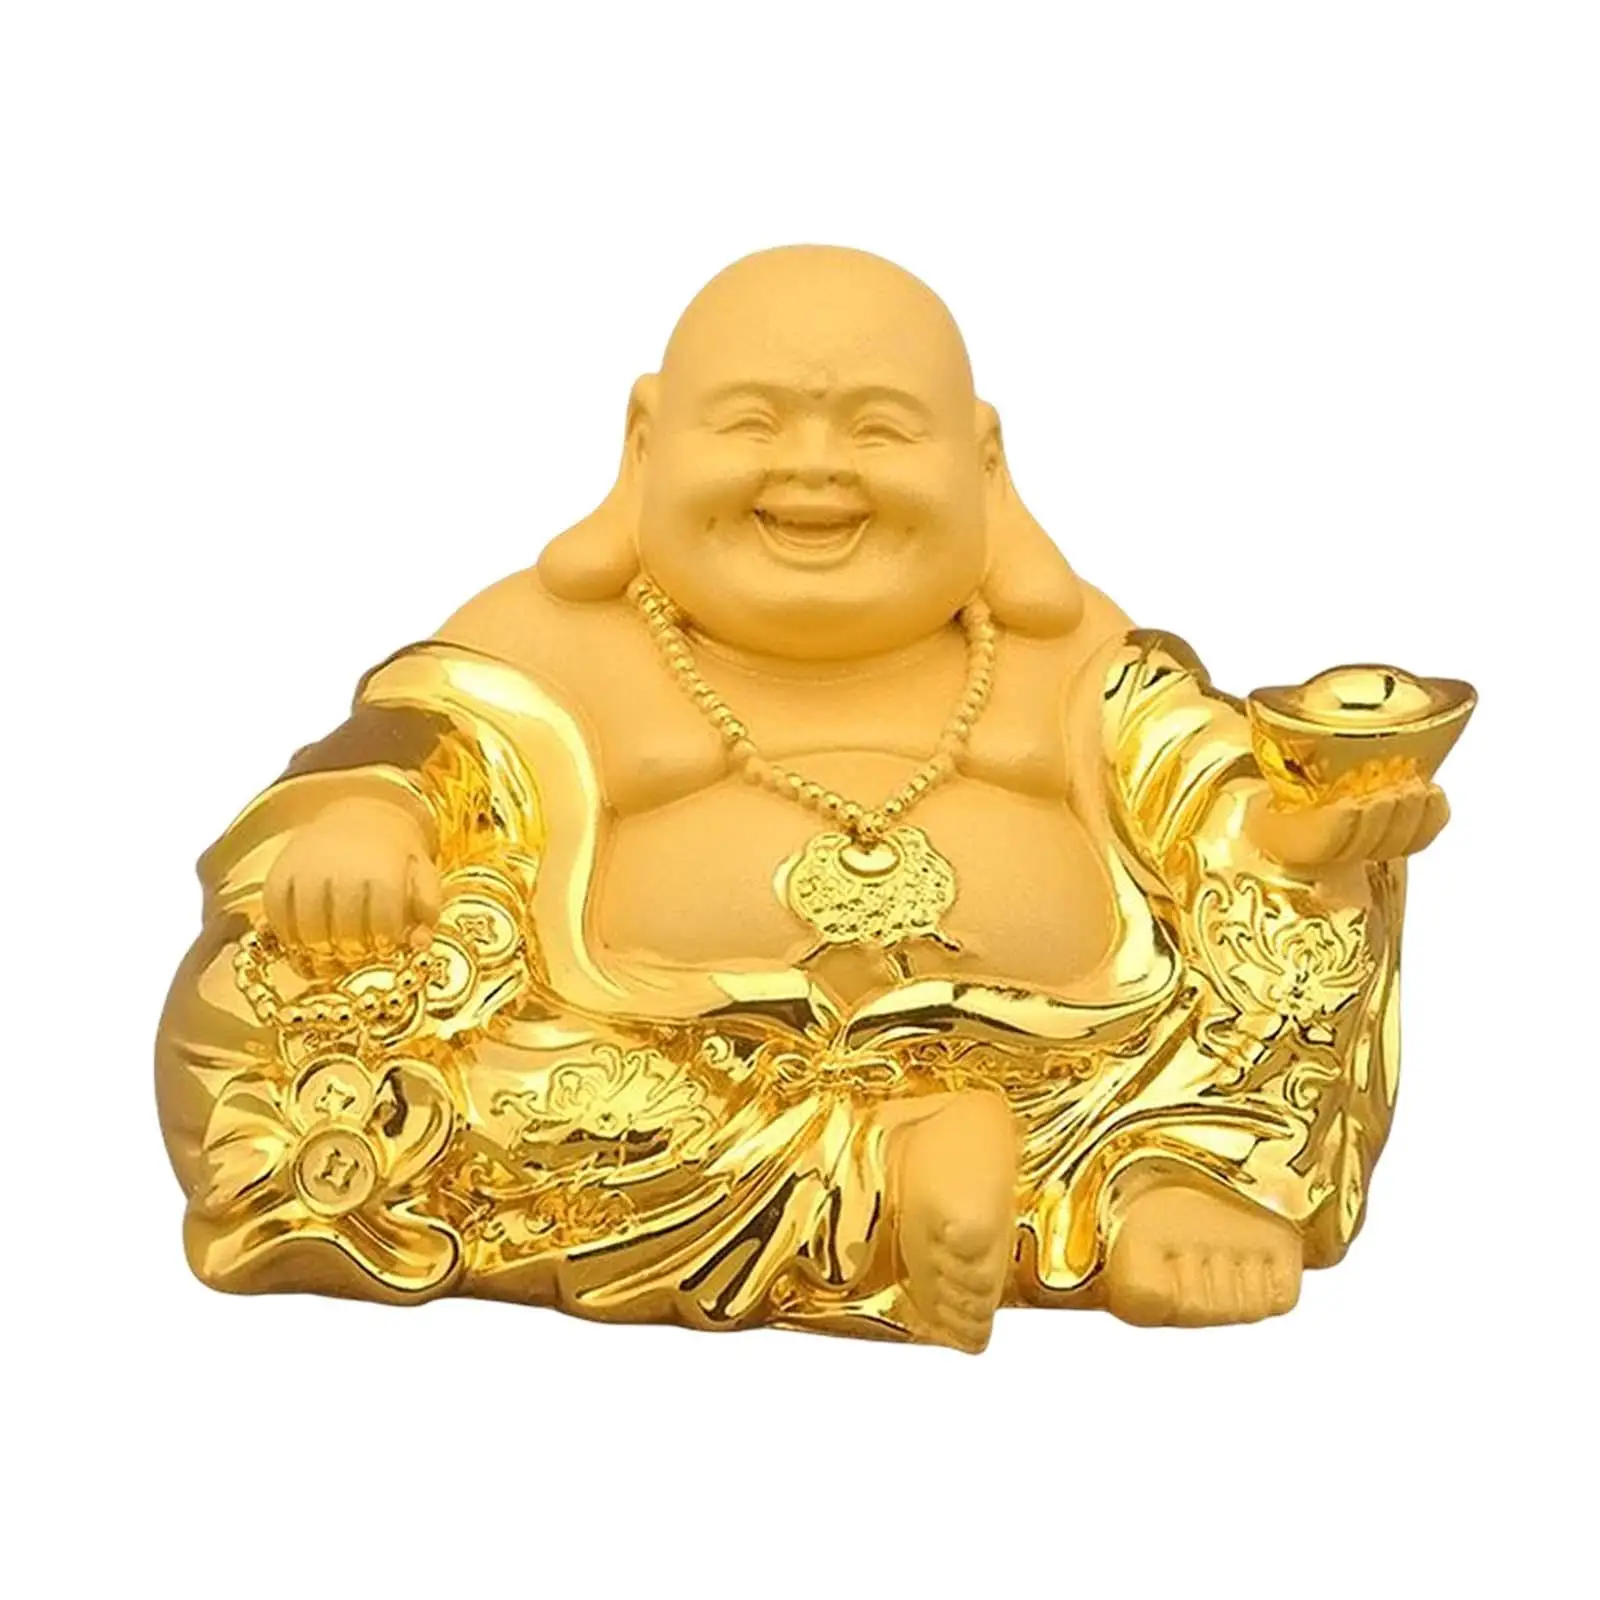 Chinese Style Maitreya Buddha Statues Sculpture Collection Laughing Buddha Ornament Figurine for Table Car Dashboard Shelf Home